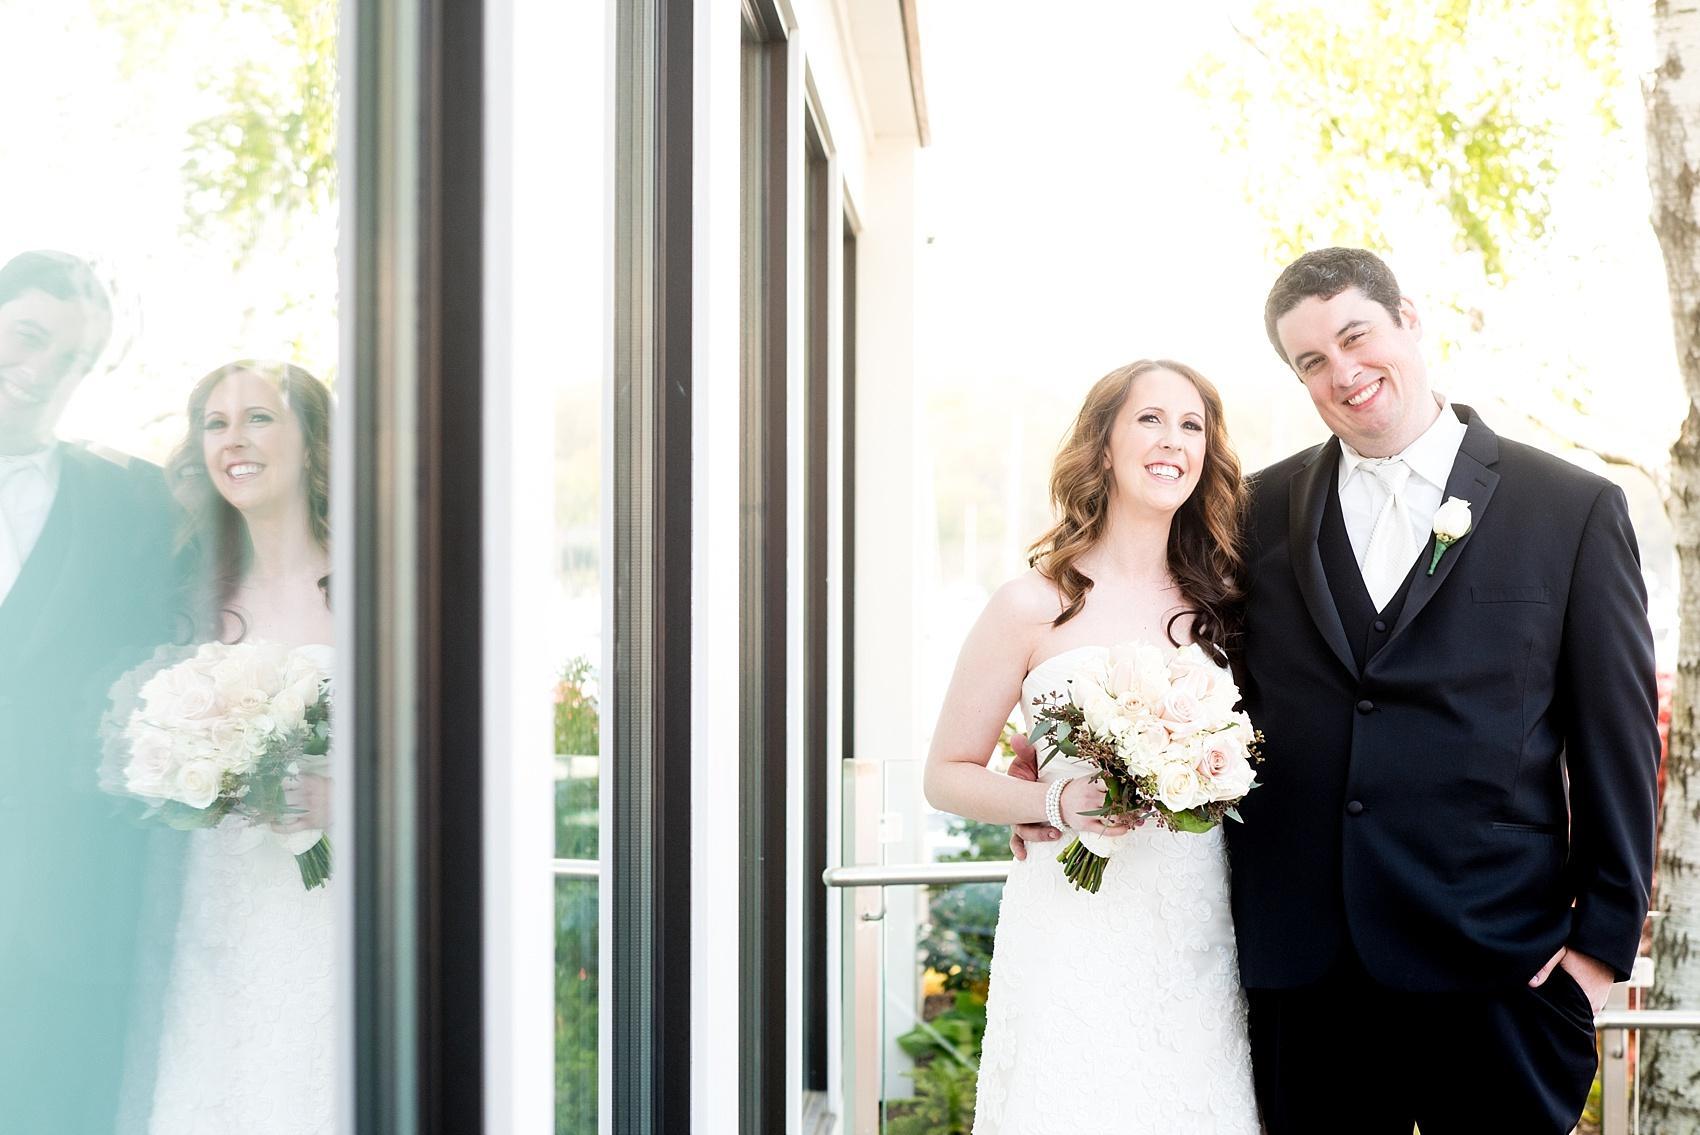 Photos by Mikkel Paige Photography for a wedding at Harbor Club on Long Island. Bride and groom portraits on the balcony overlooking the water.